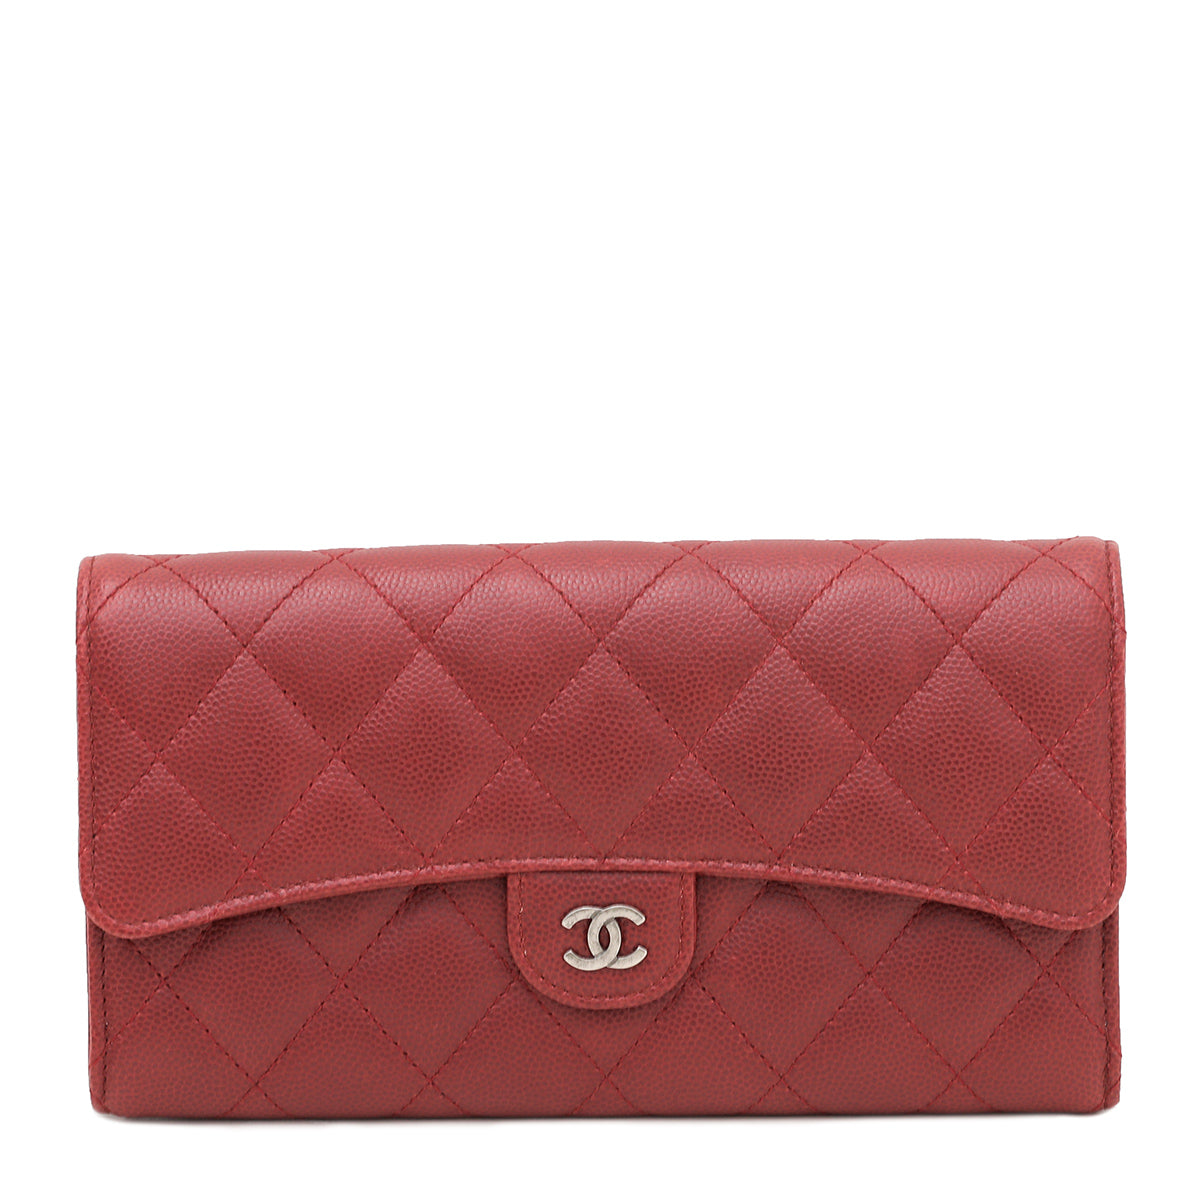 Chanel Red Classic Flap Wallet